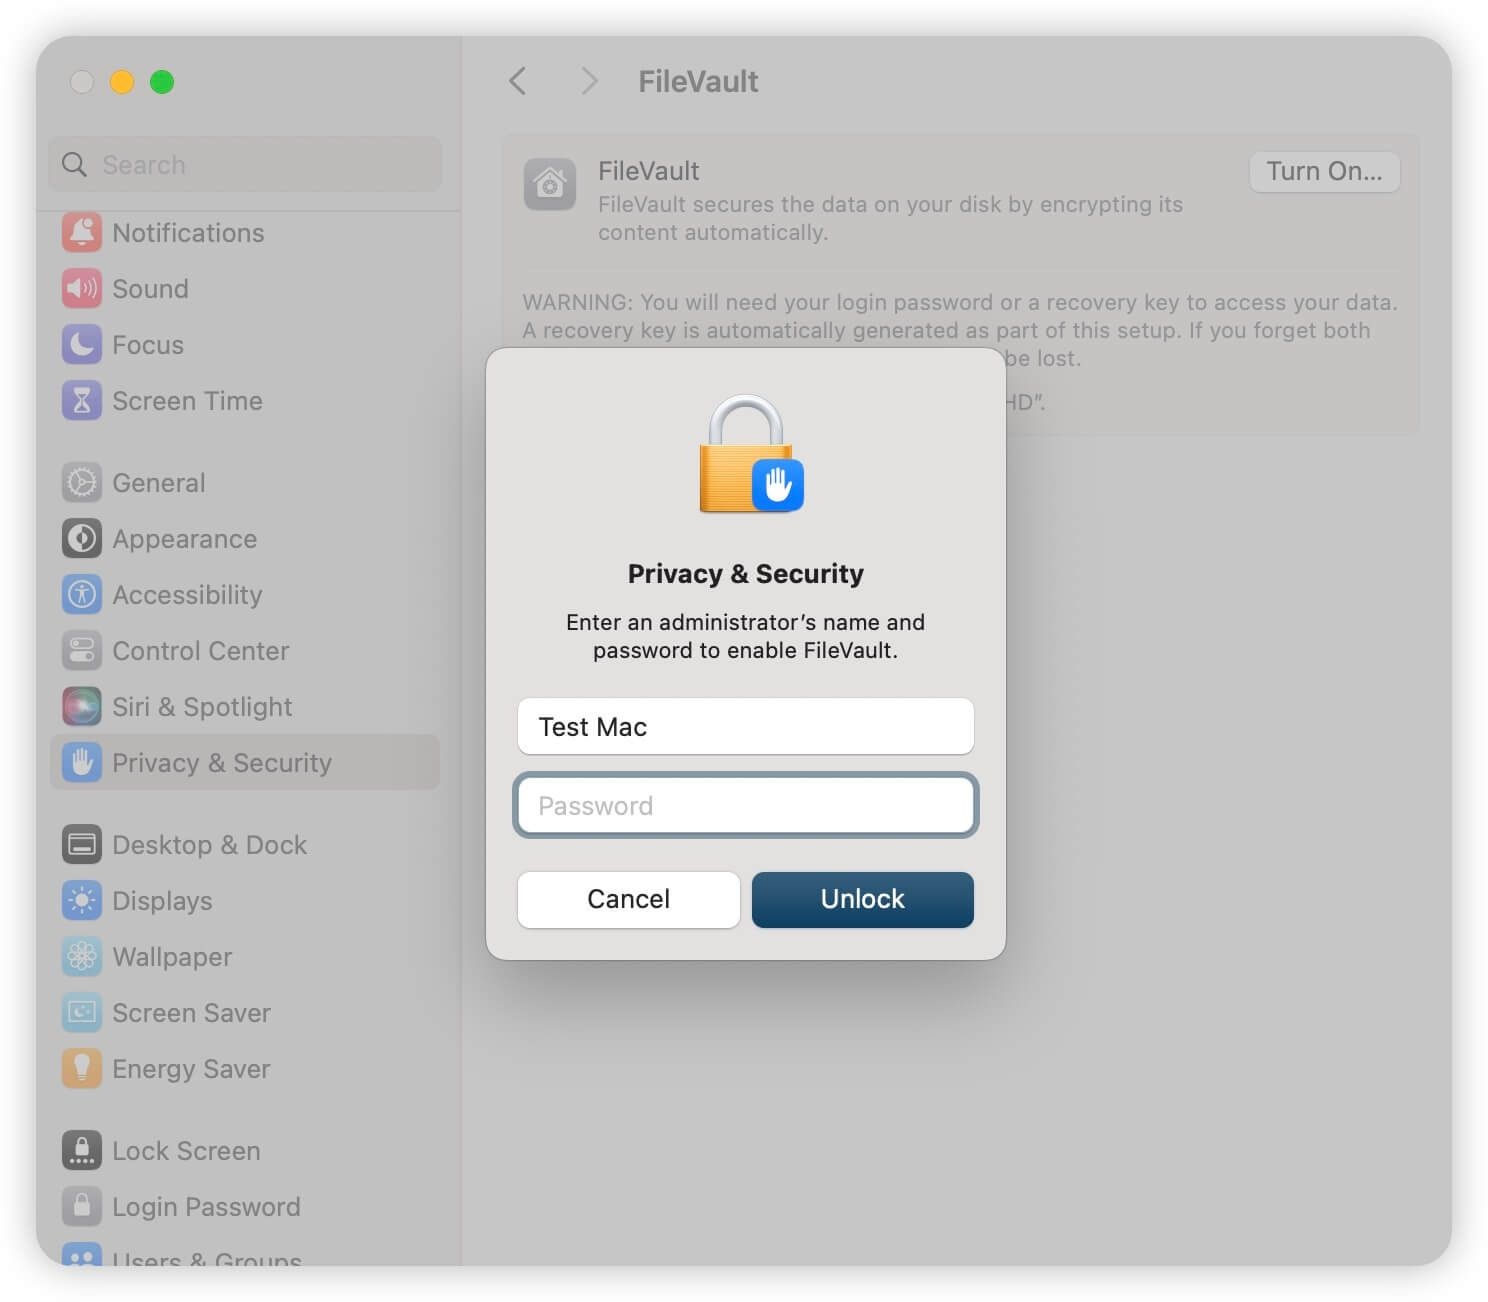 How to turn on FileVault on Mac